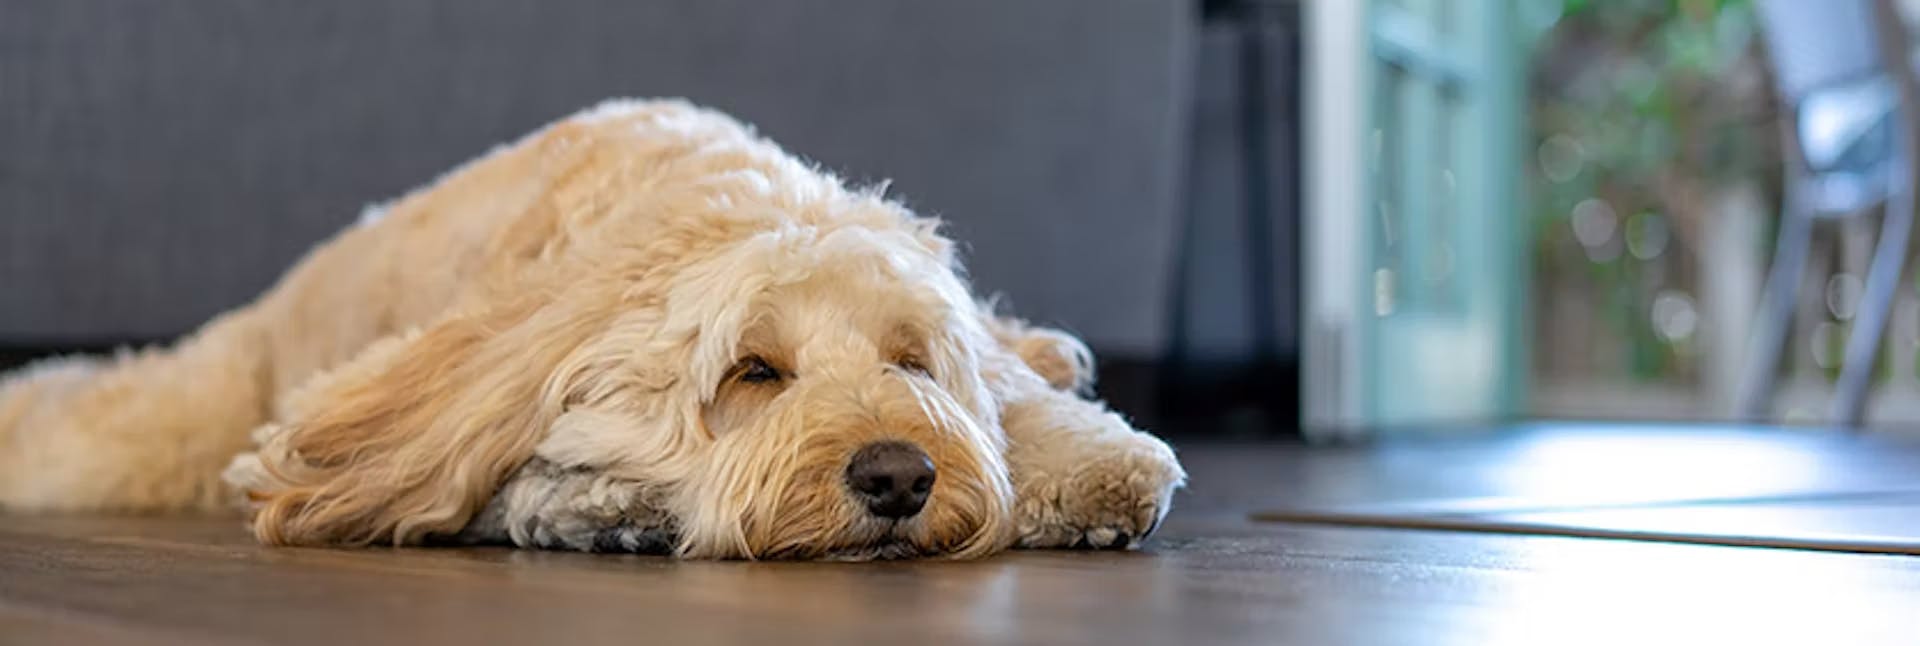 A Goldendoodle having a nap during a dog sitting assignment